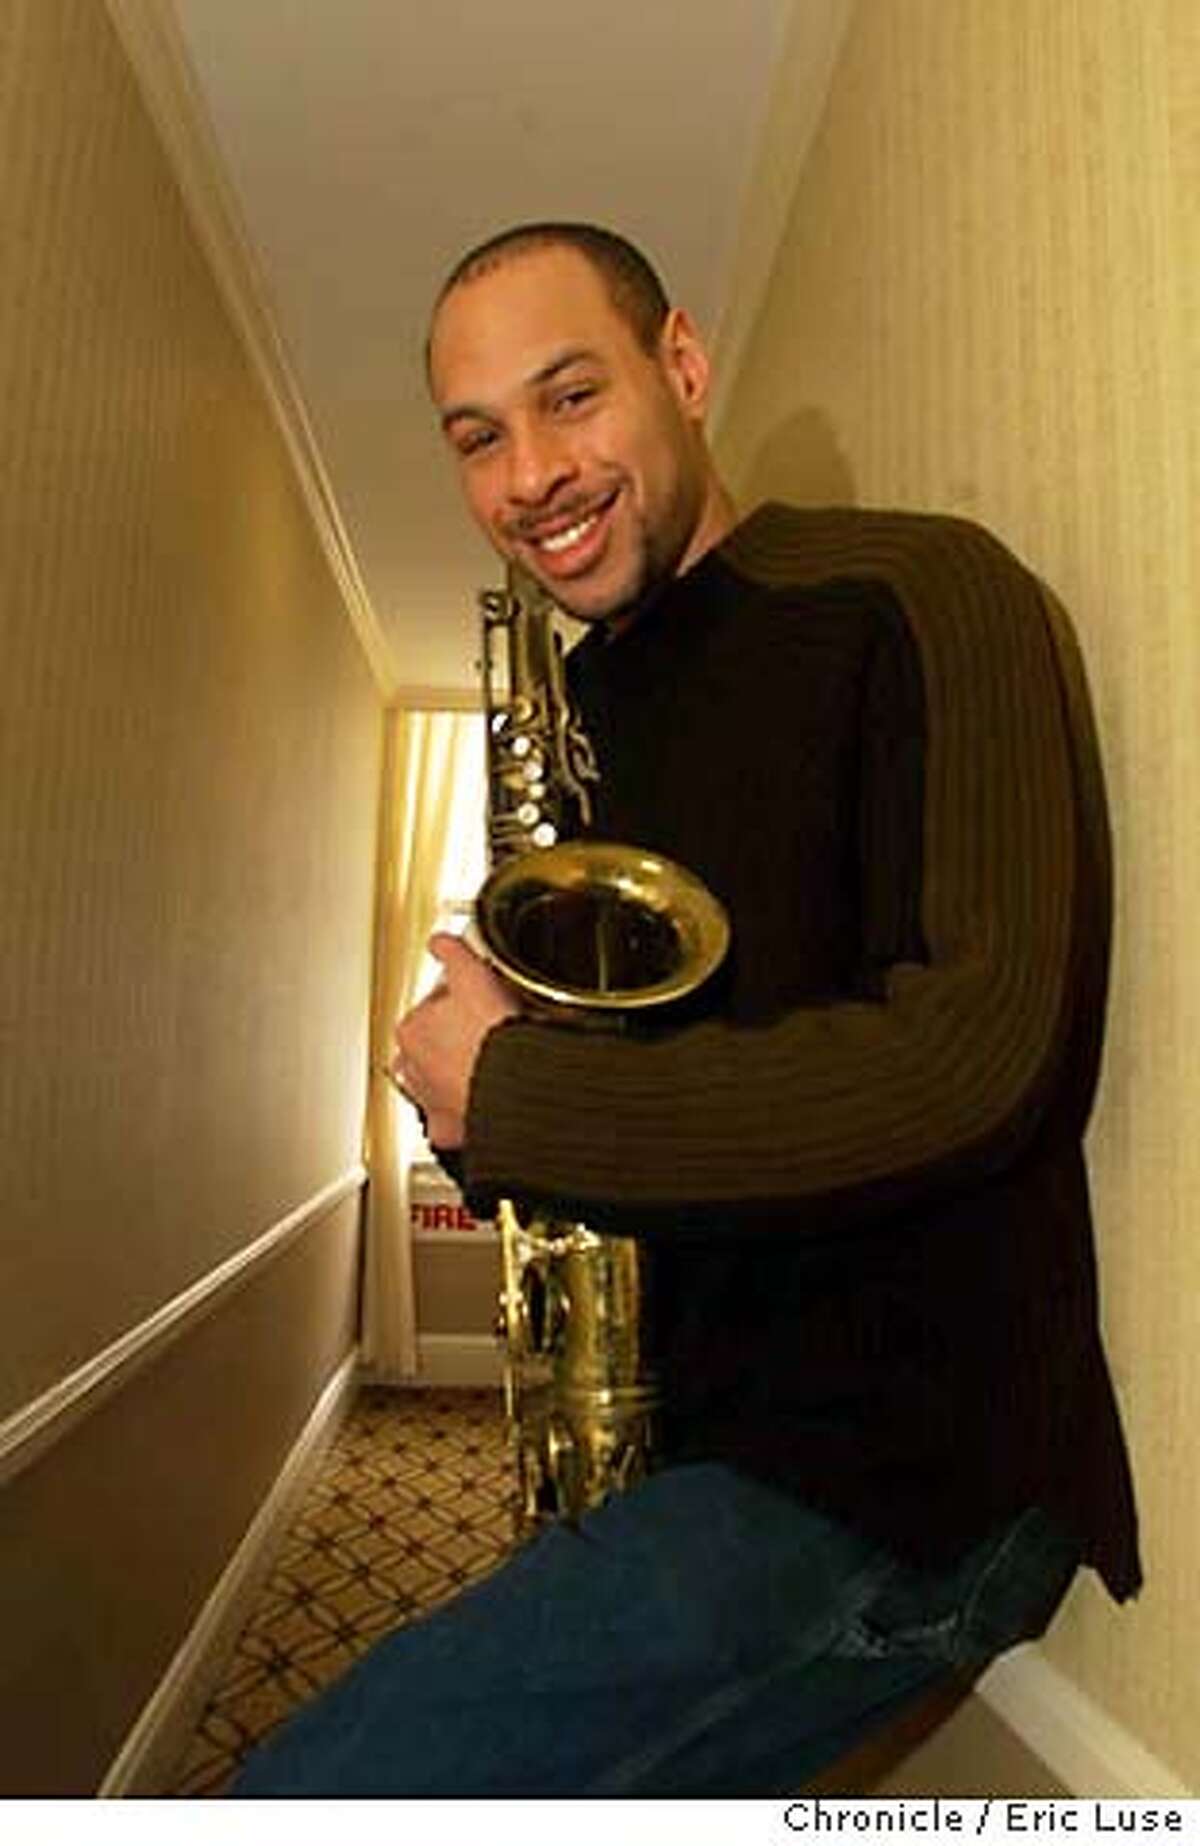 REDMAN25B-C-12FEB01-PK-EL Saxophonist composer Joshua Redman has composed his first extended composition which will premier at SFJAZZ. ALSO RAN 05/07/03 BY ERIC LUSE/THE CHRONICLE CAT